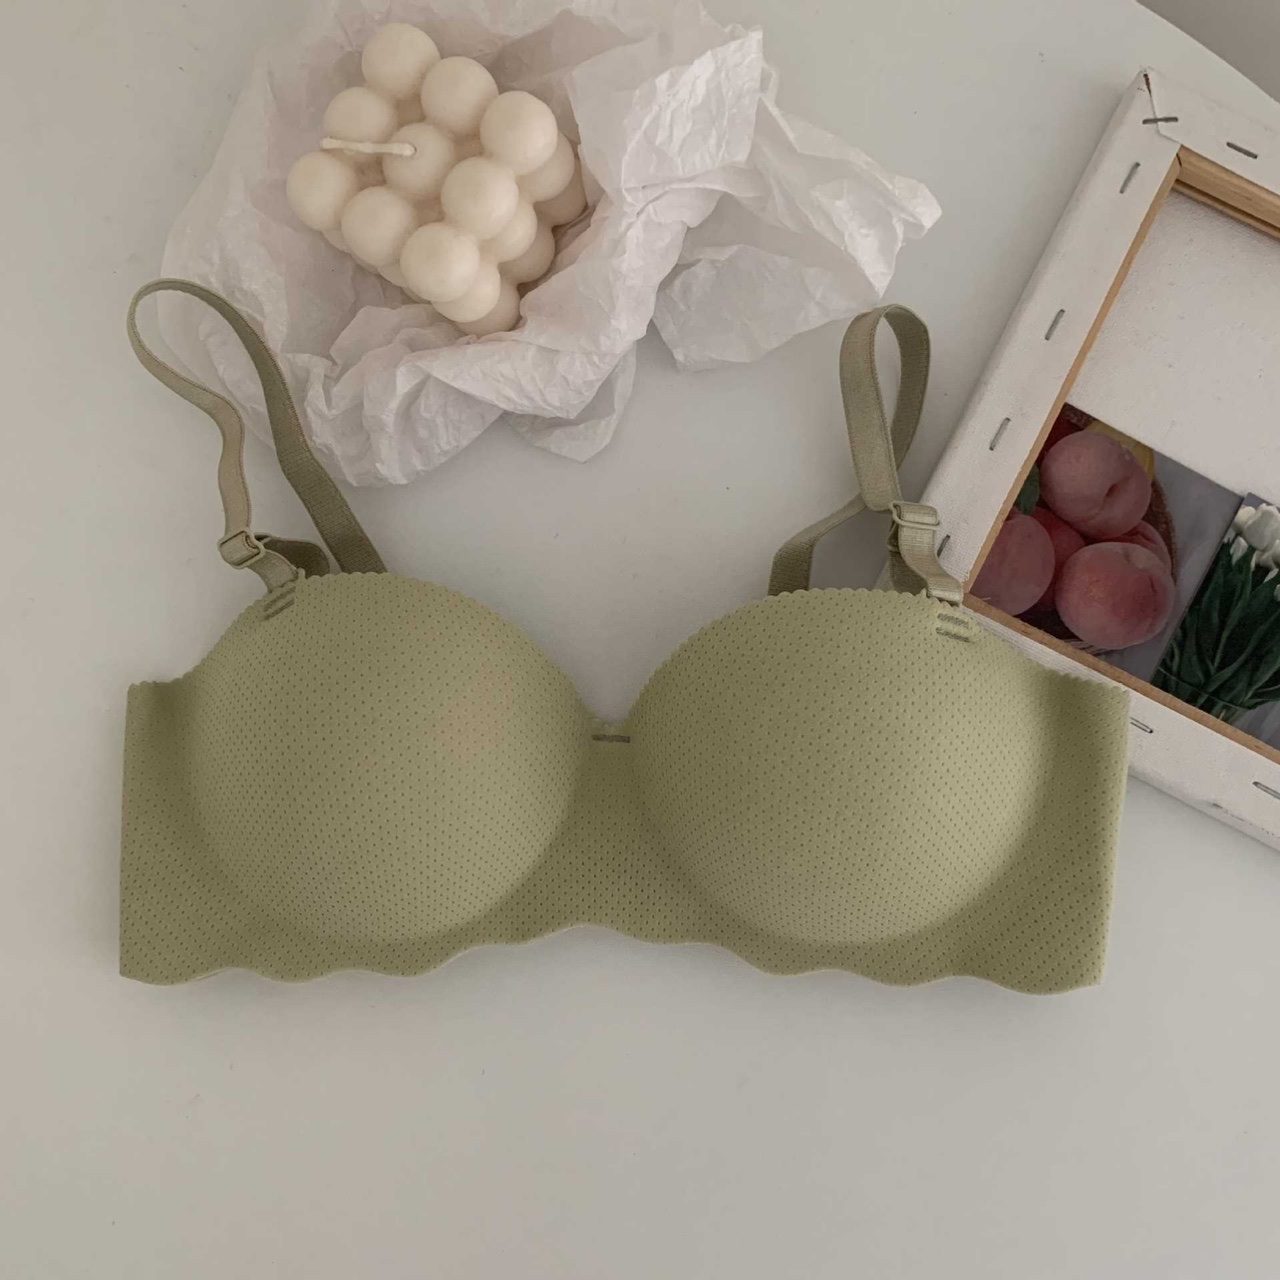 High quality Breast gathering Push-up Bra with underwire Cup B 34-38 8869